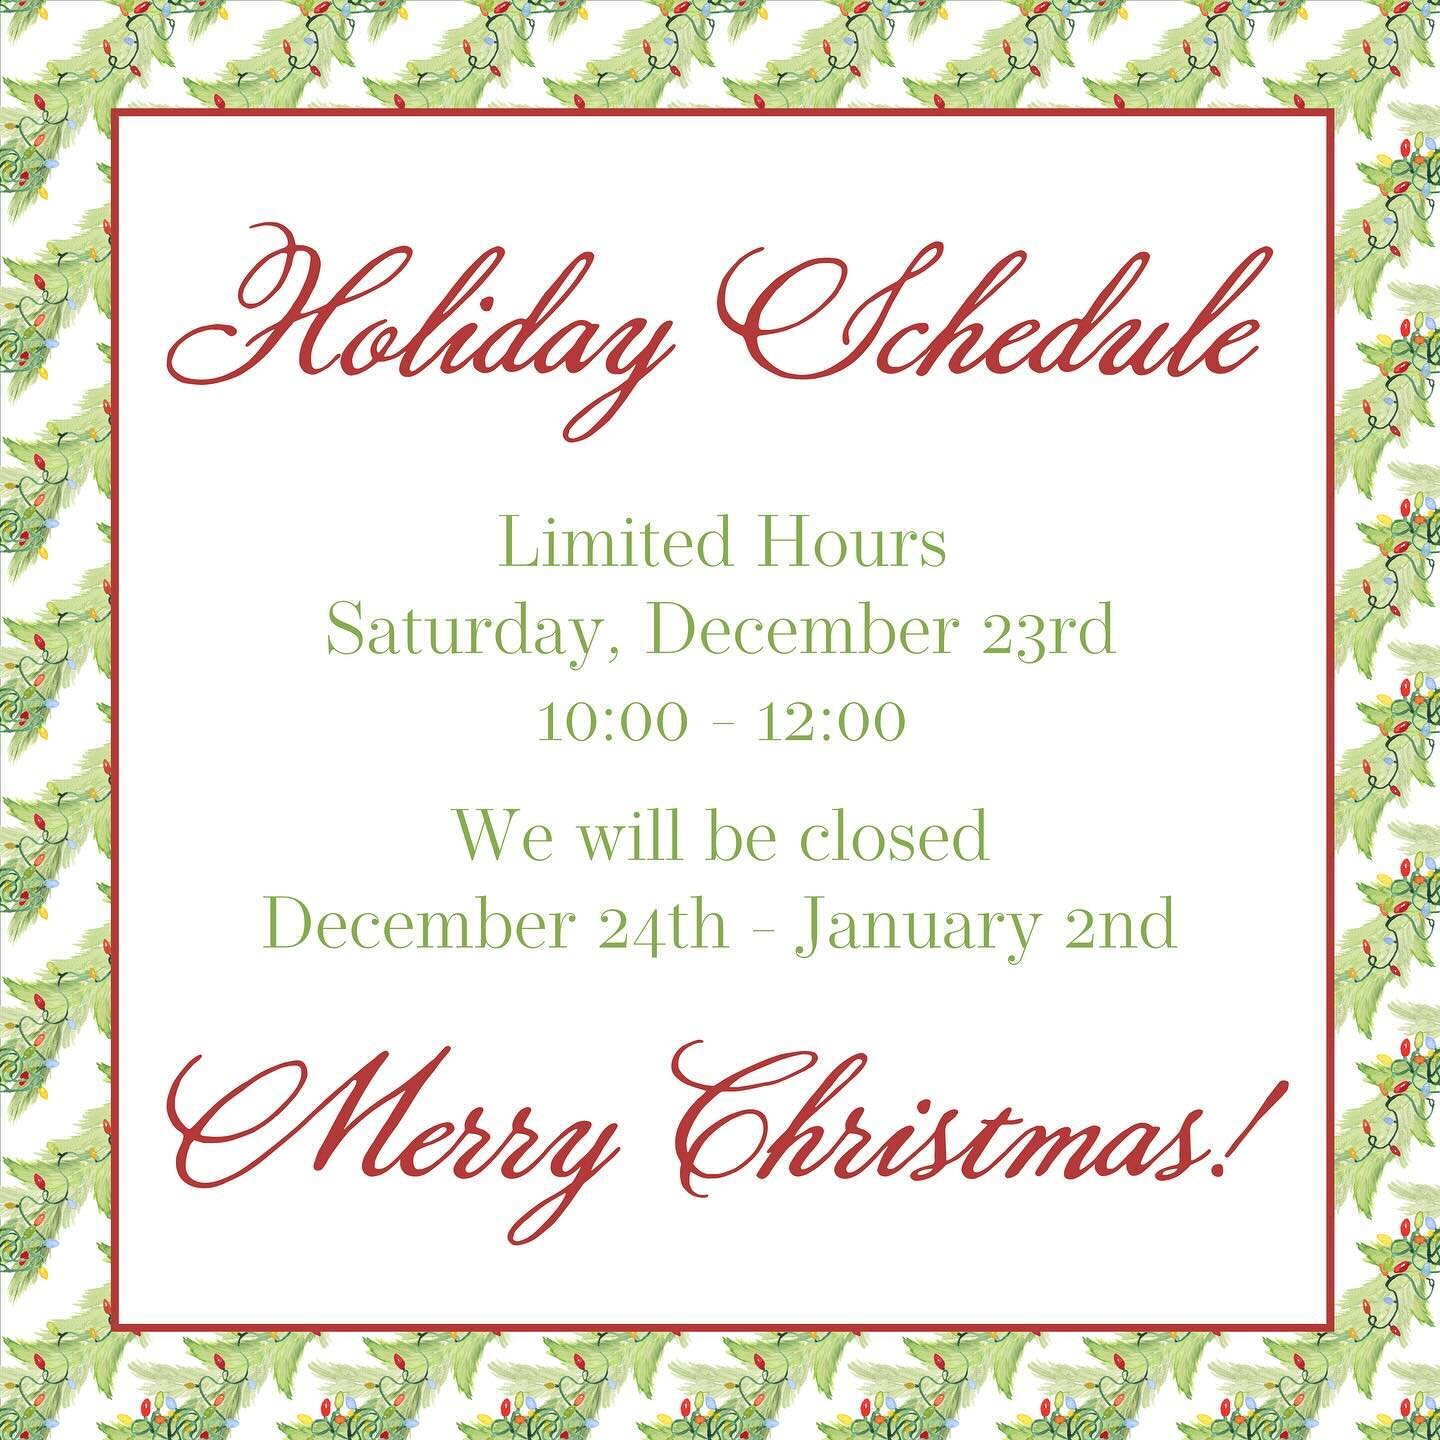 We&rsquo;ll be here tomorrow 10:00 until 12:00 for any last Christmas goodies you&rsquo;ll need, and then we&rsquo;ll be closed through January 2nd to catch up and prepare for the New Year! Merry Christmas! 🎁🎄❤️💌